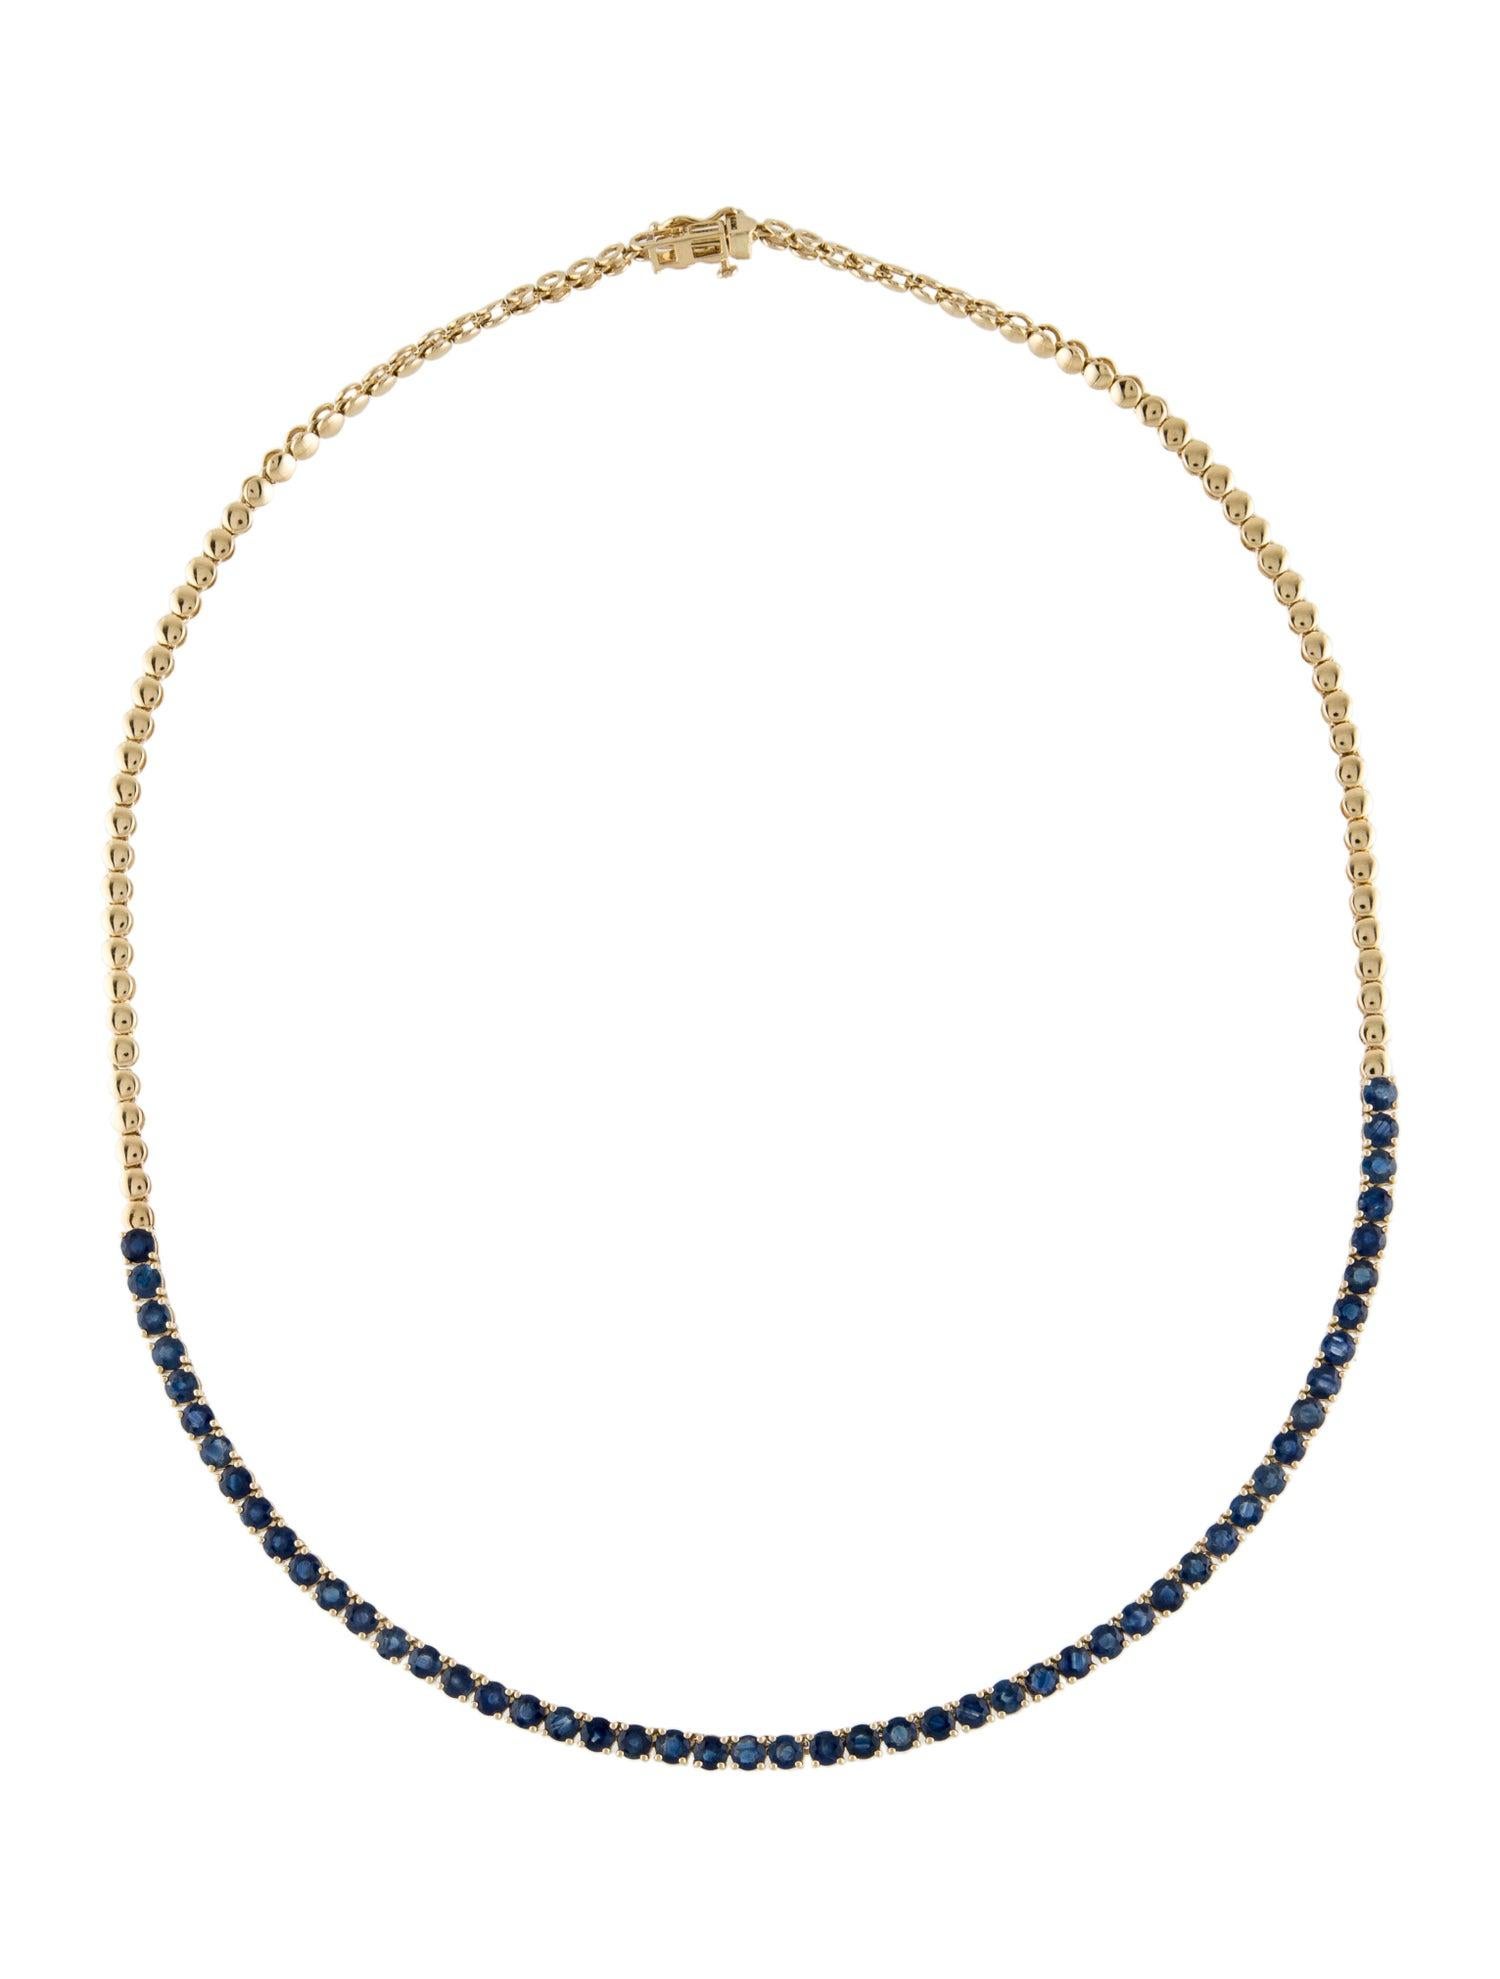 Dive into a world of enchantment with our Ocean Elegance Sapphire Necklace, a mesmerizing jewel from the Beneath the Waves Collection by Jeweltique. This exquisite necklace is a tribute to the captivating beauty of the ocean's depths, where nature